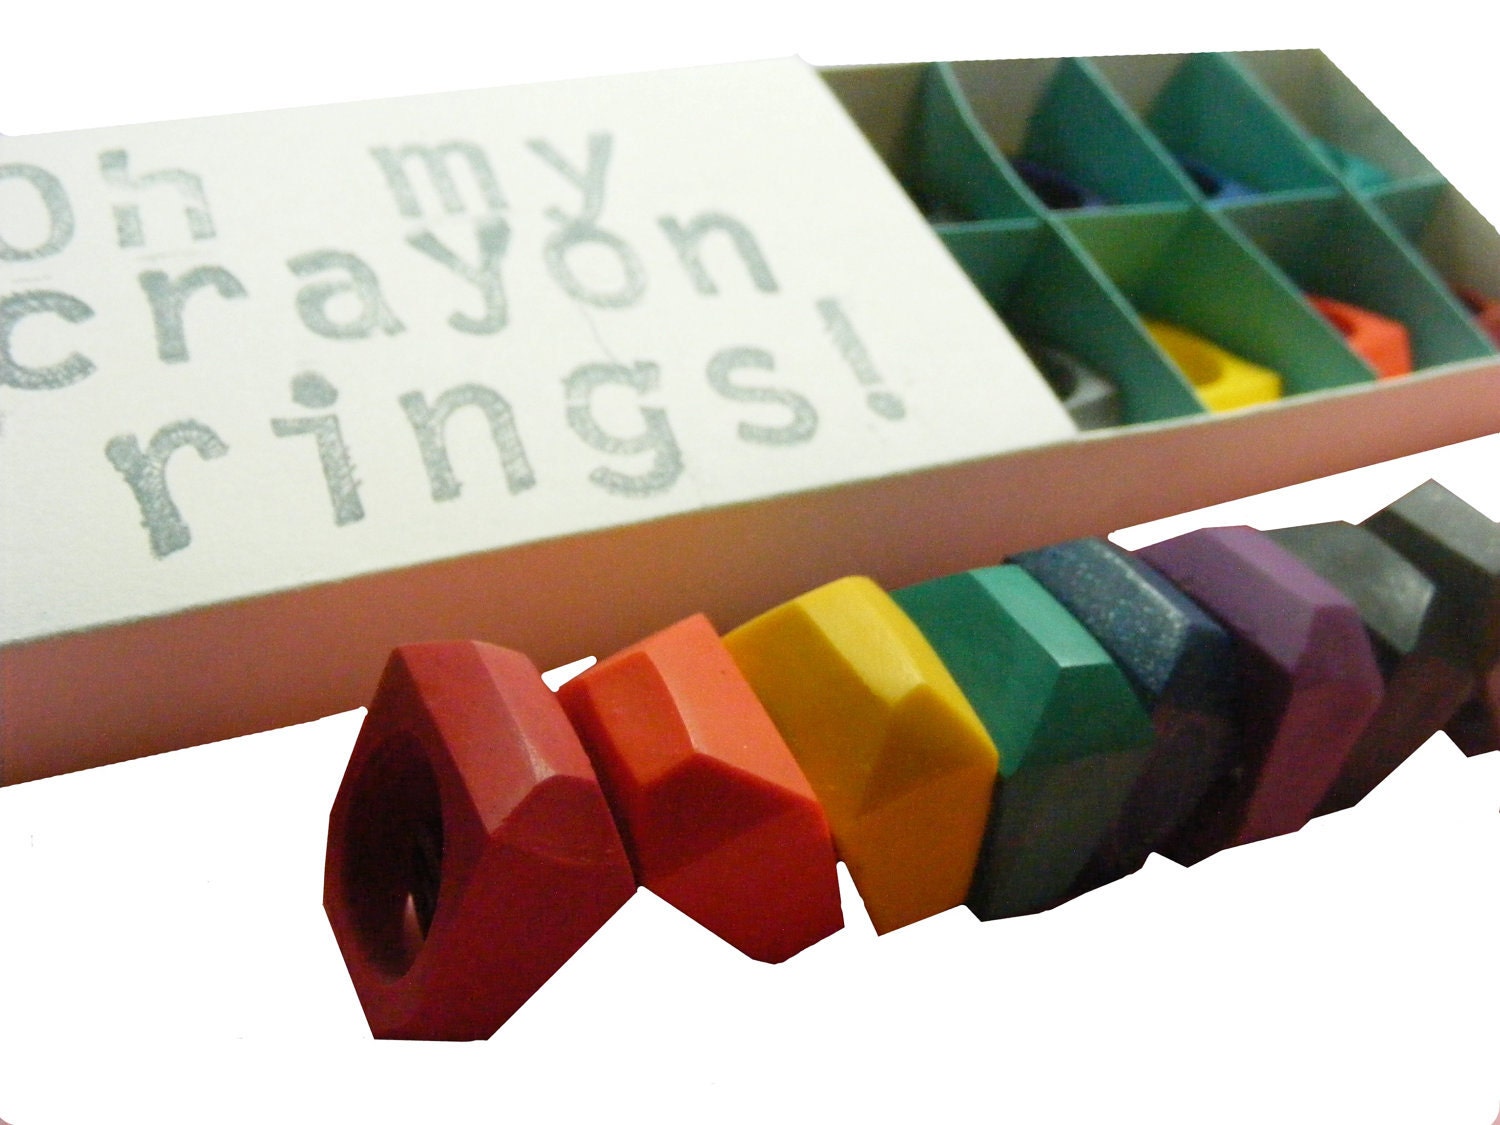 PREMADE Crayon Rings set of 8 - choose from SIZE: kids, 5, 6, 7, or 8